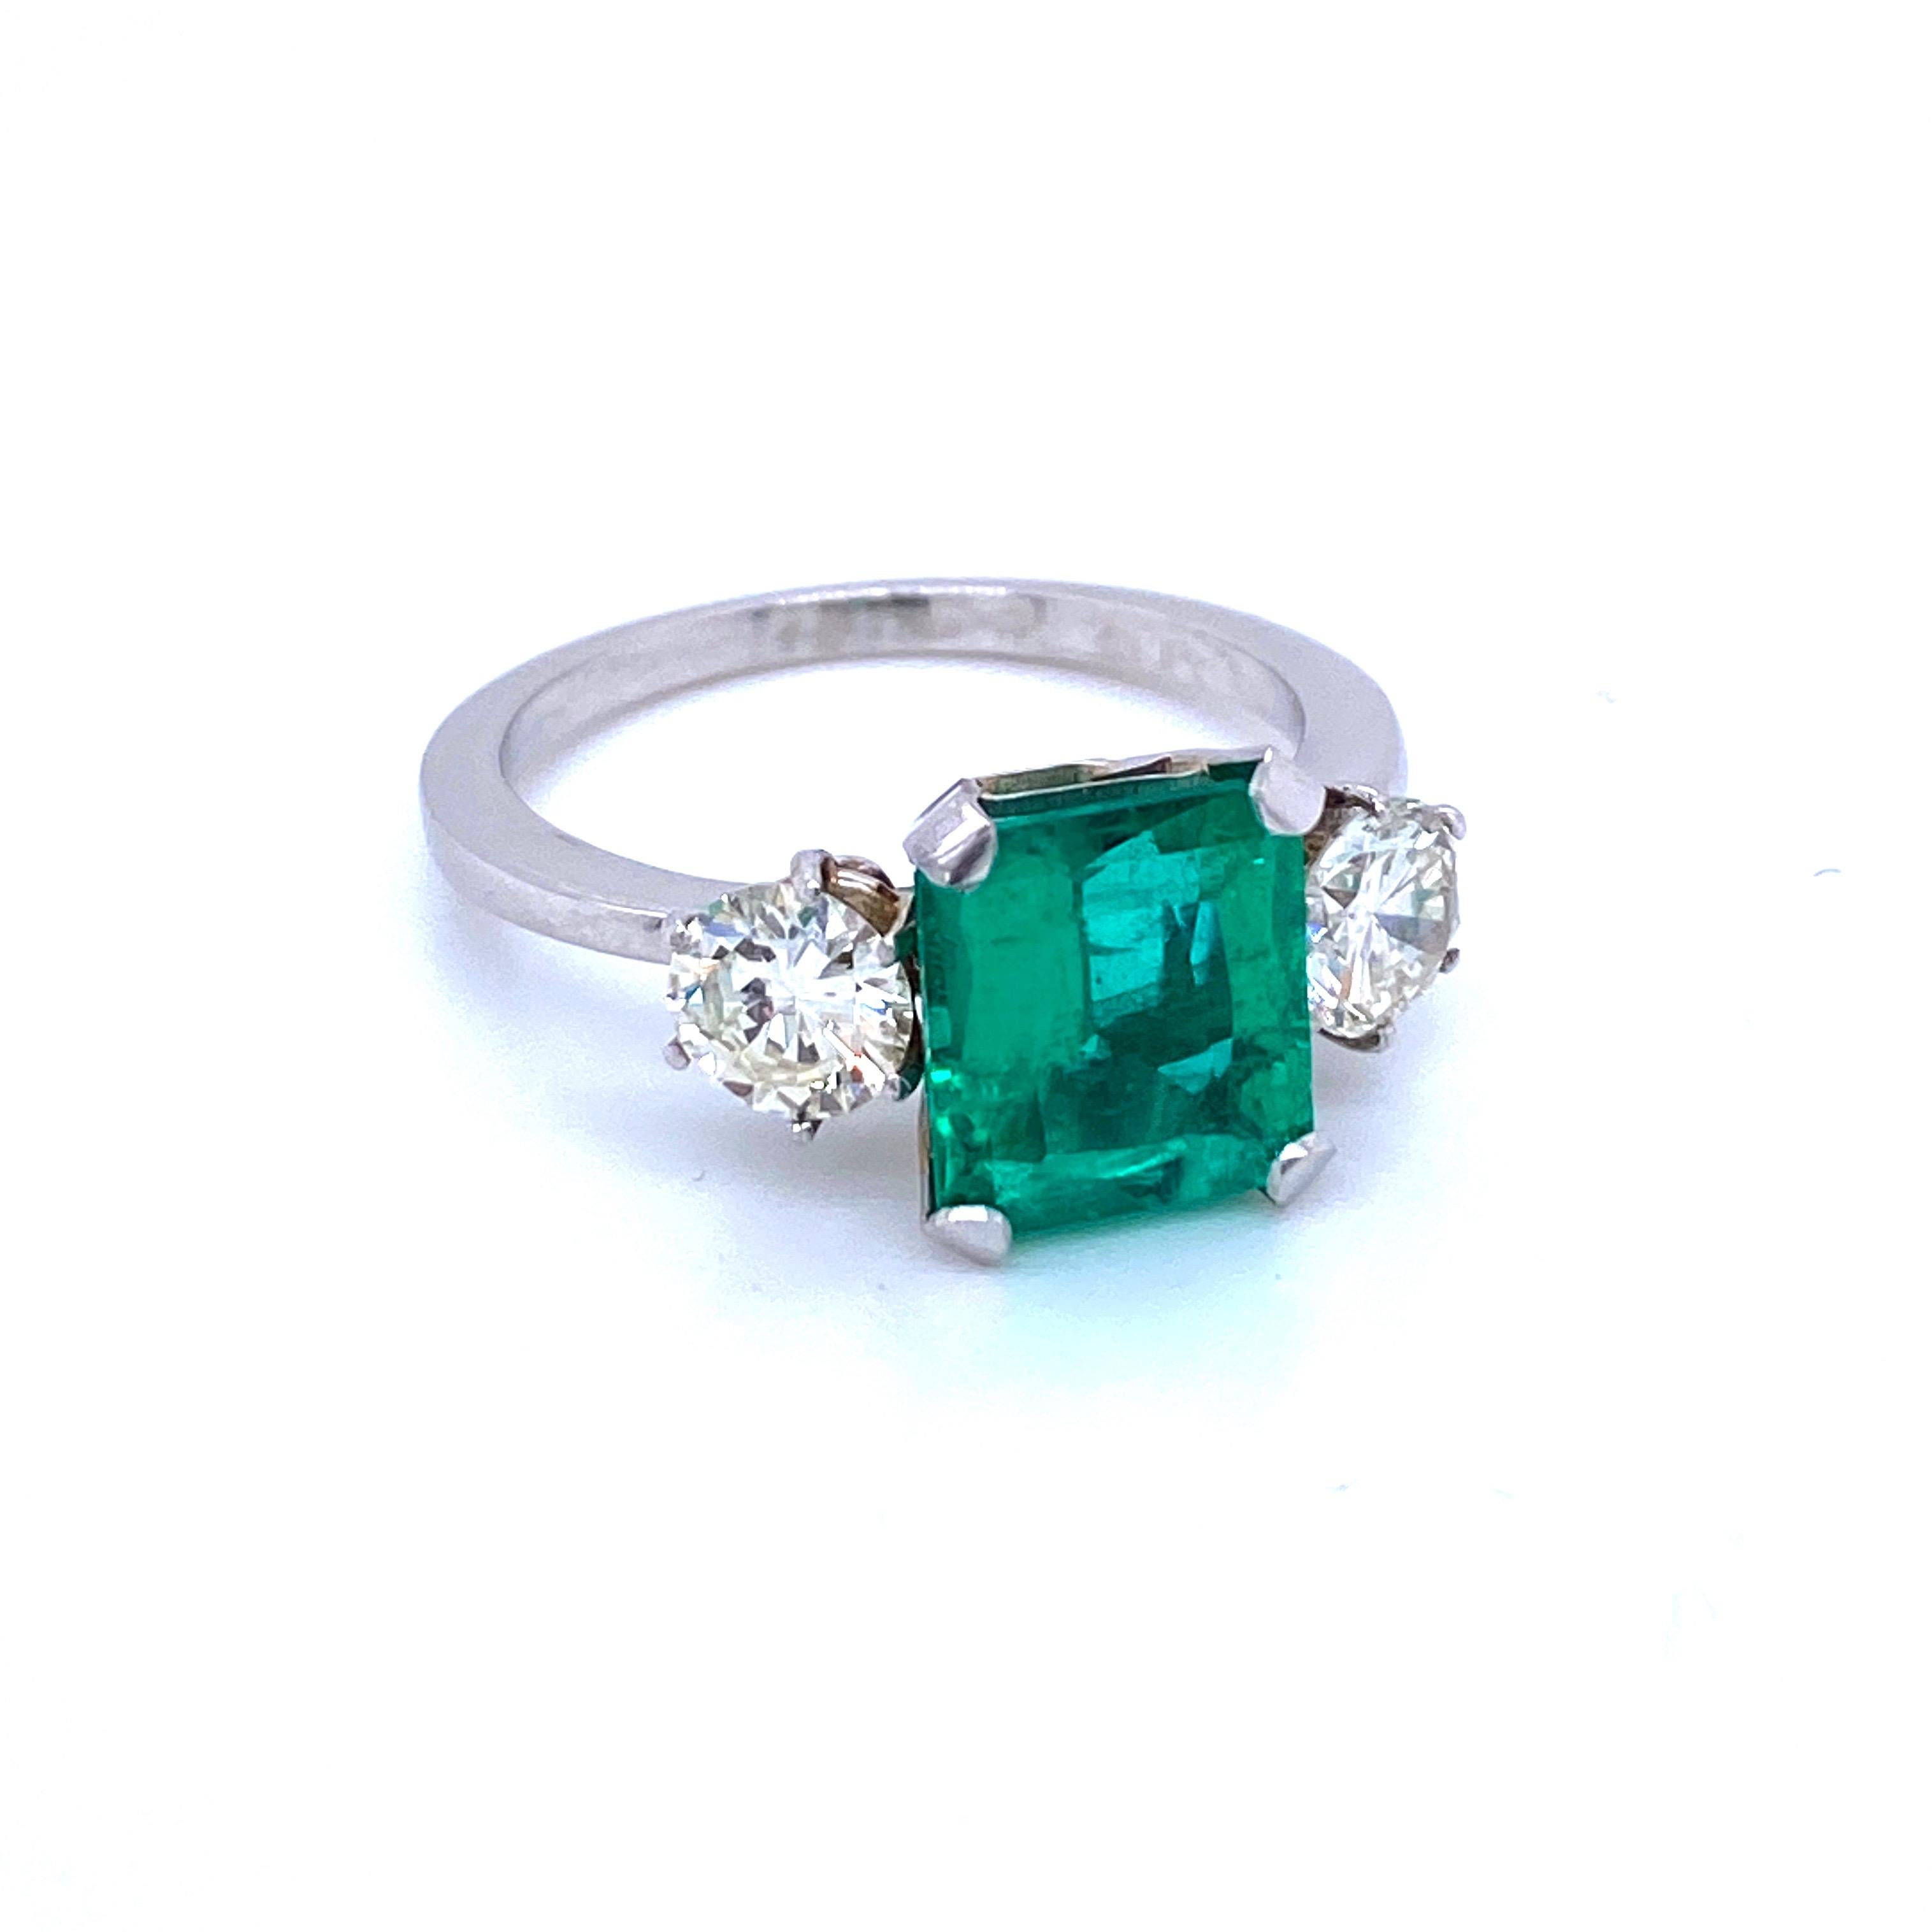 A beautiful and classy Platinum engagement ring showcasing a Natural certified Colombian Emerald approx. 2.75 carats of great quality and amazing color, surrounded by approx. 1.10 carat of Old mine cut diamonds graded I color Vvs.
Origin Italy,